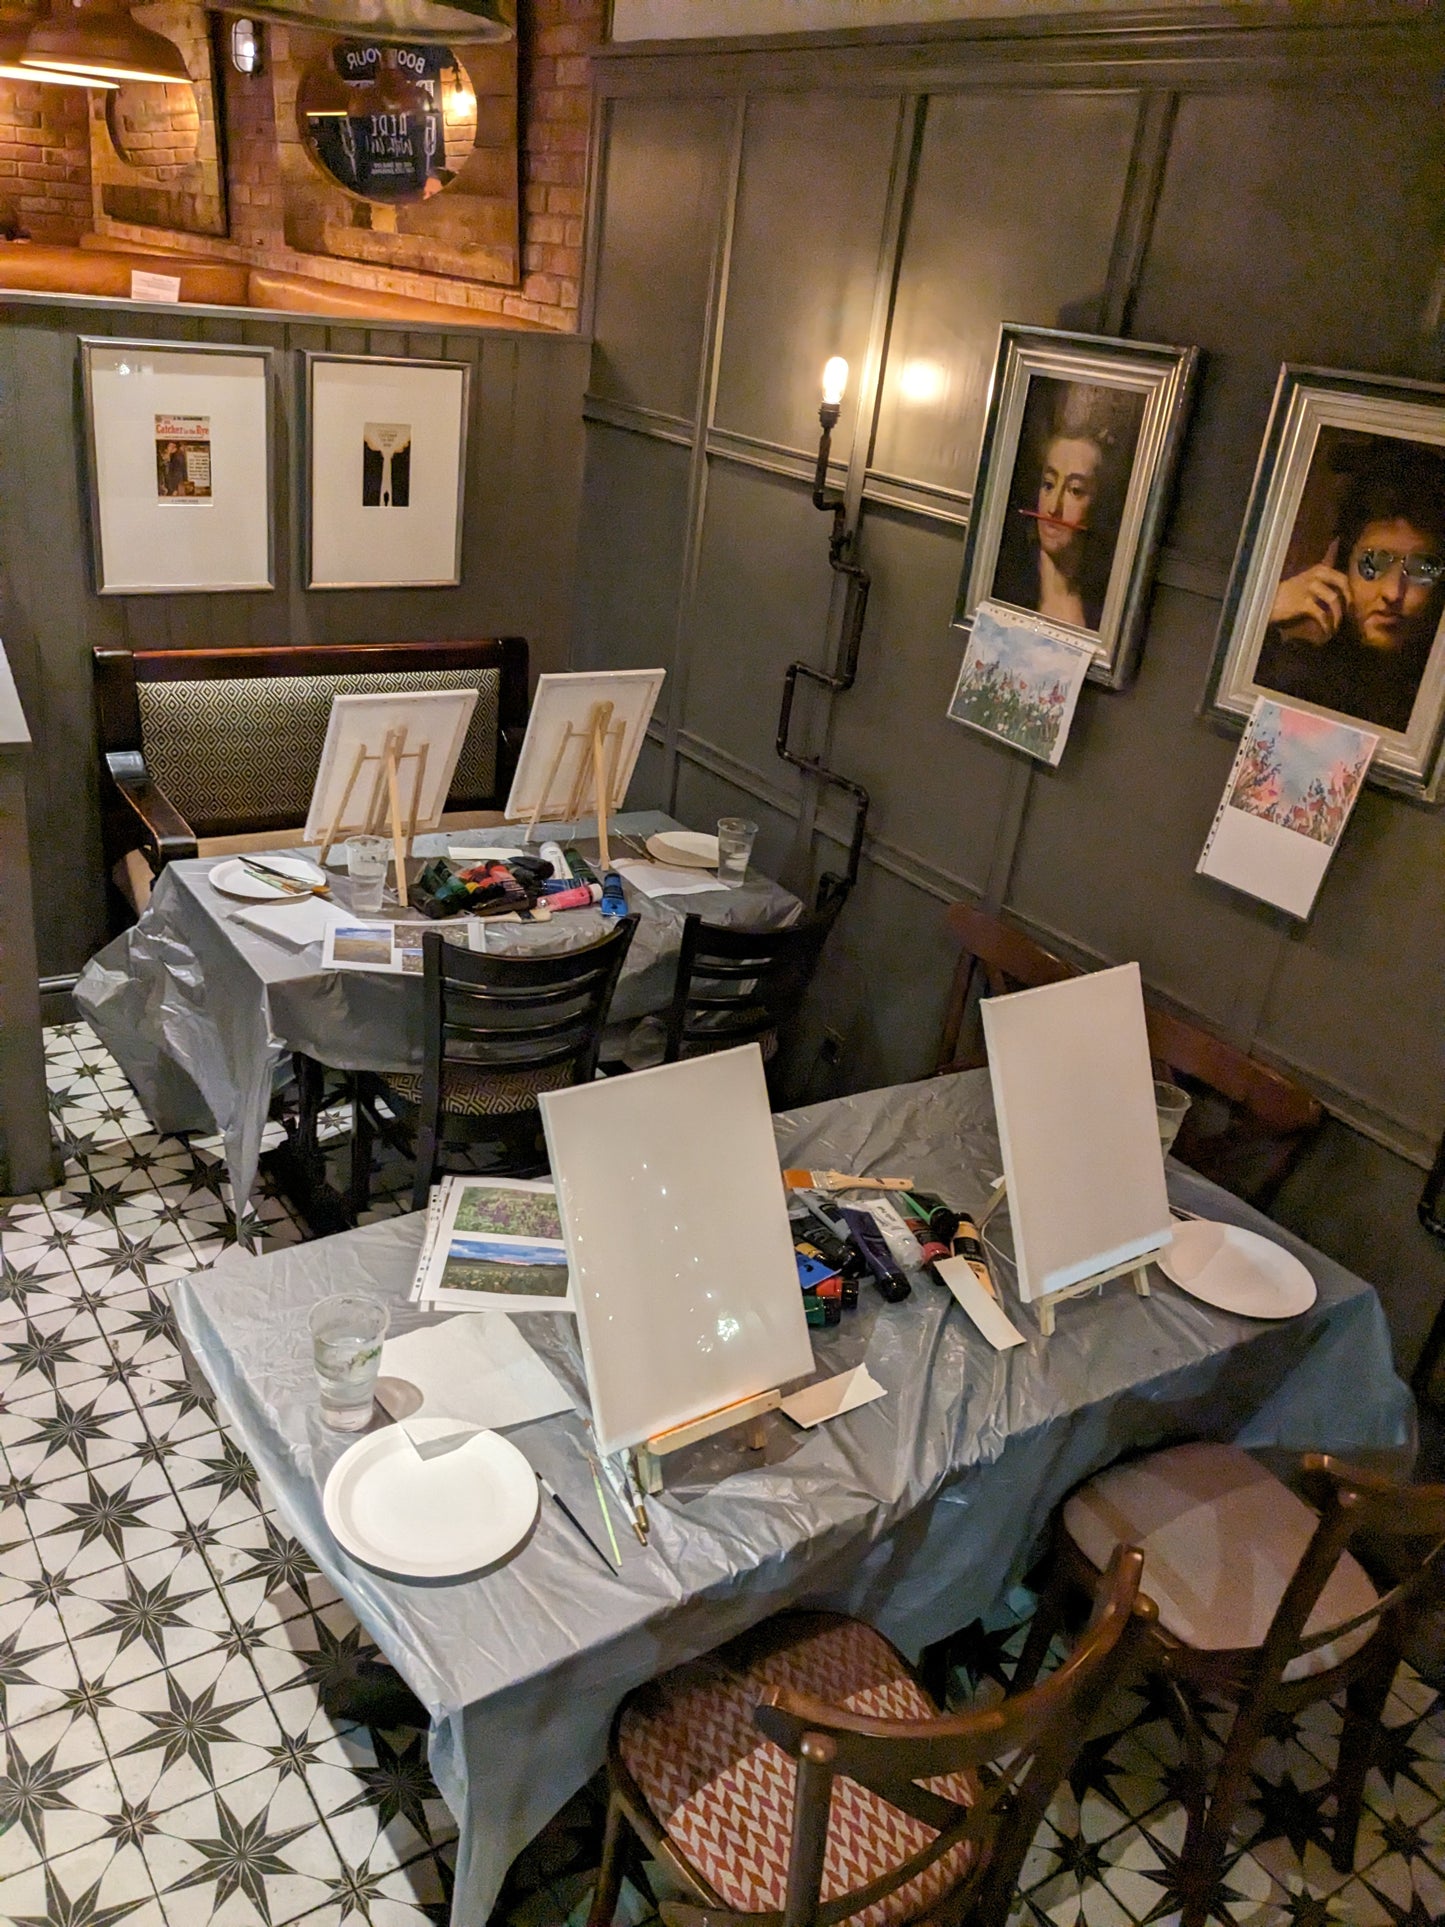 EXPRESSIVE LILY PAD POND - Painting Workshop at The Catcher in The Rye Pub, Finchley, London - 13th MARCH 2024, 7.30pm